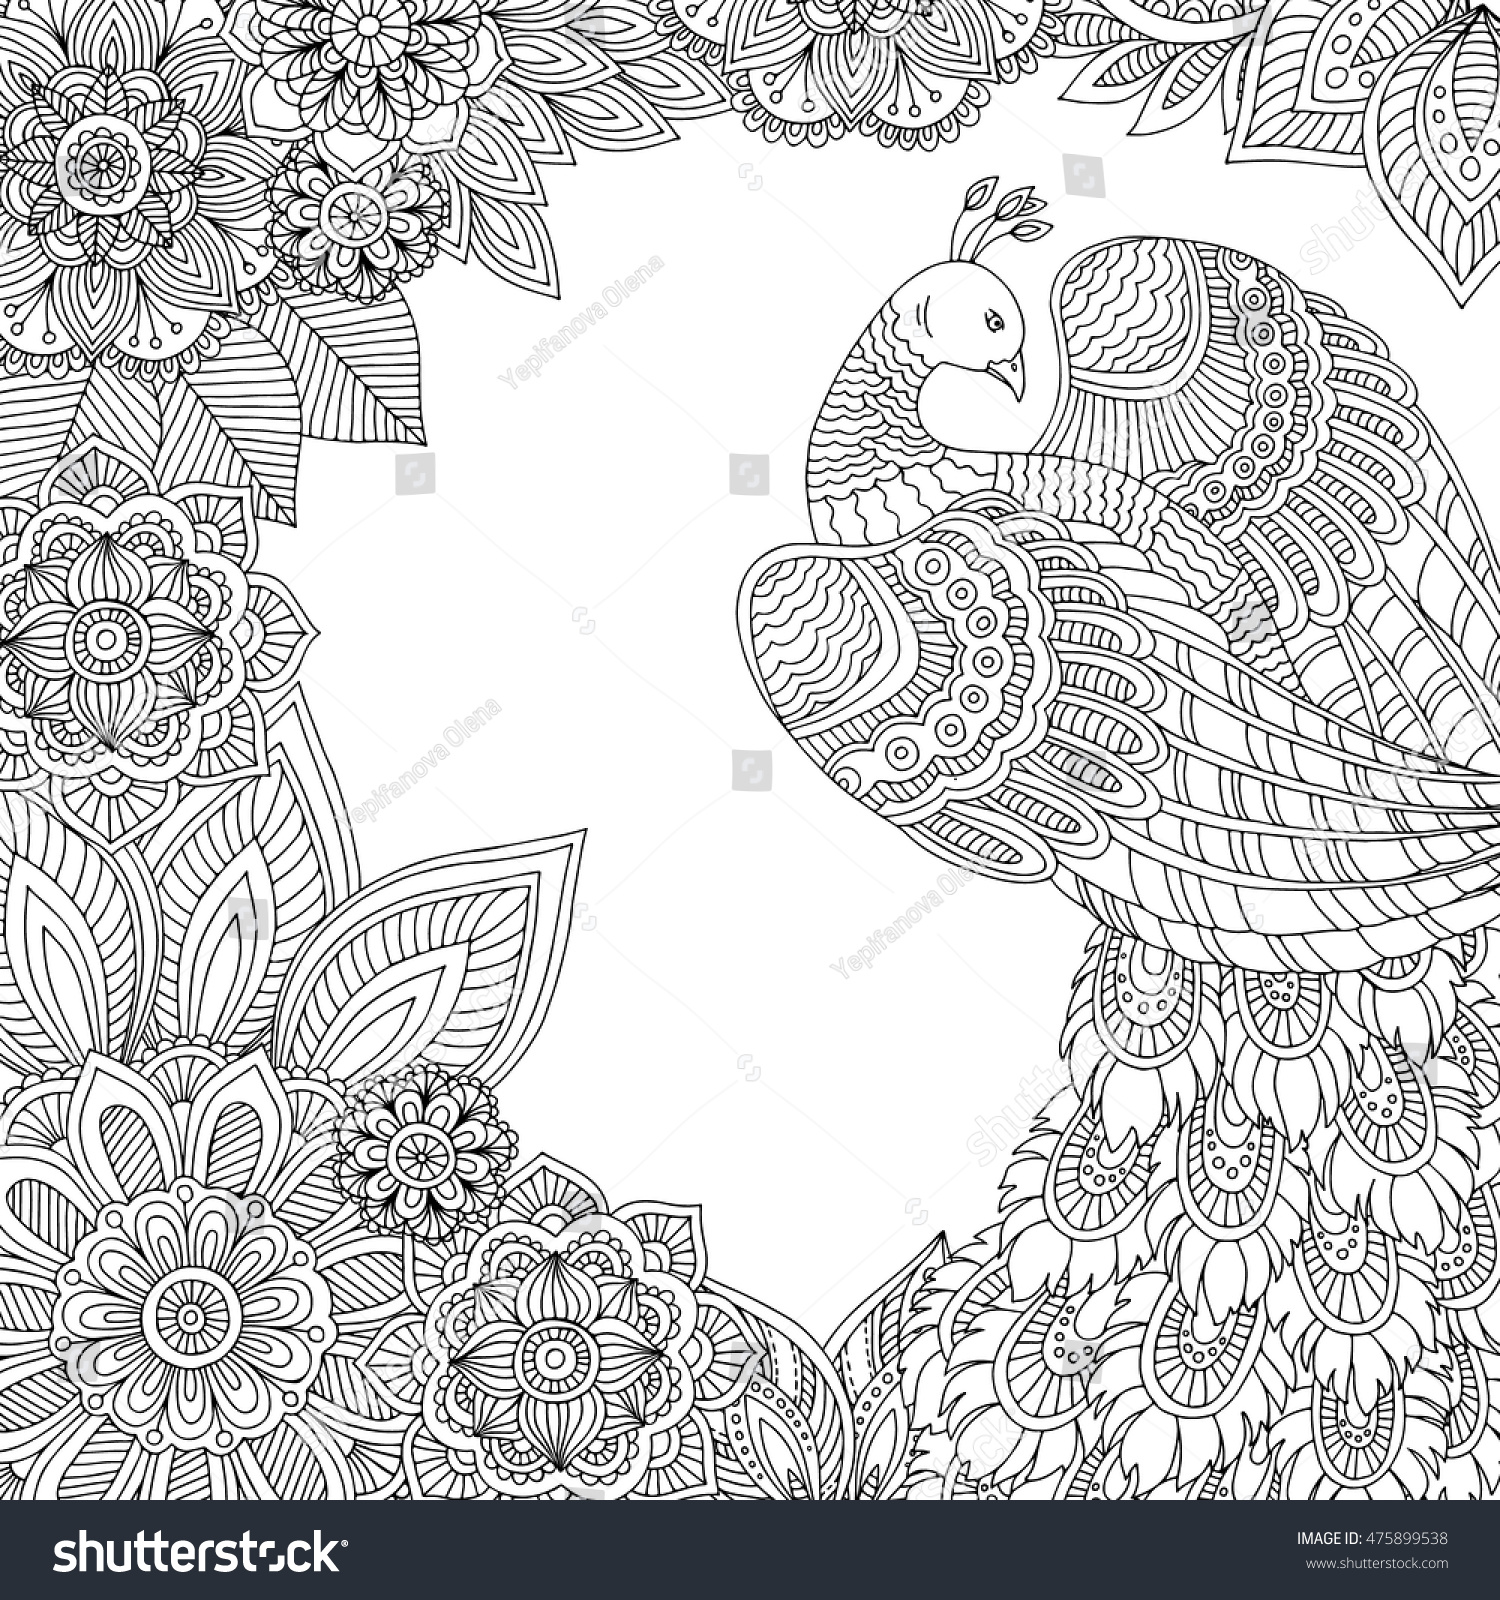 Download Printable Coloring Page Adults Peacock Leaves Stock Vector 475899538 - Shutterstock